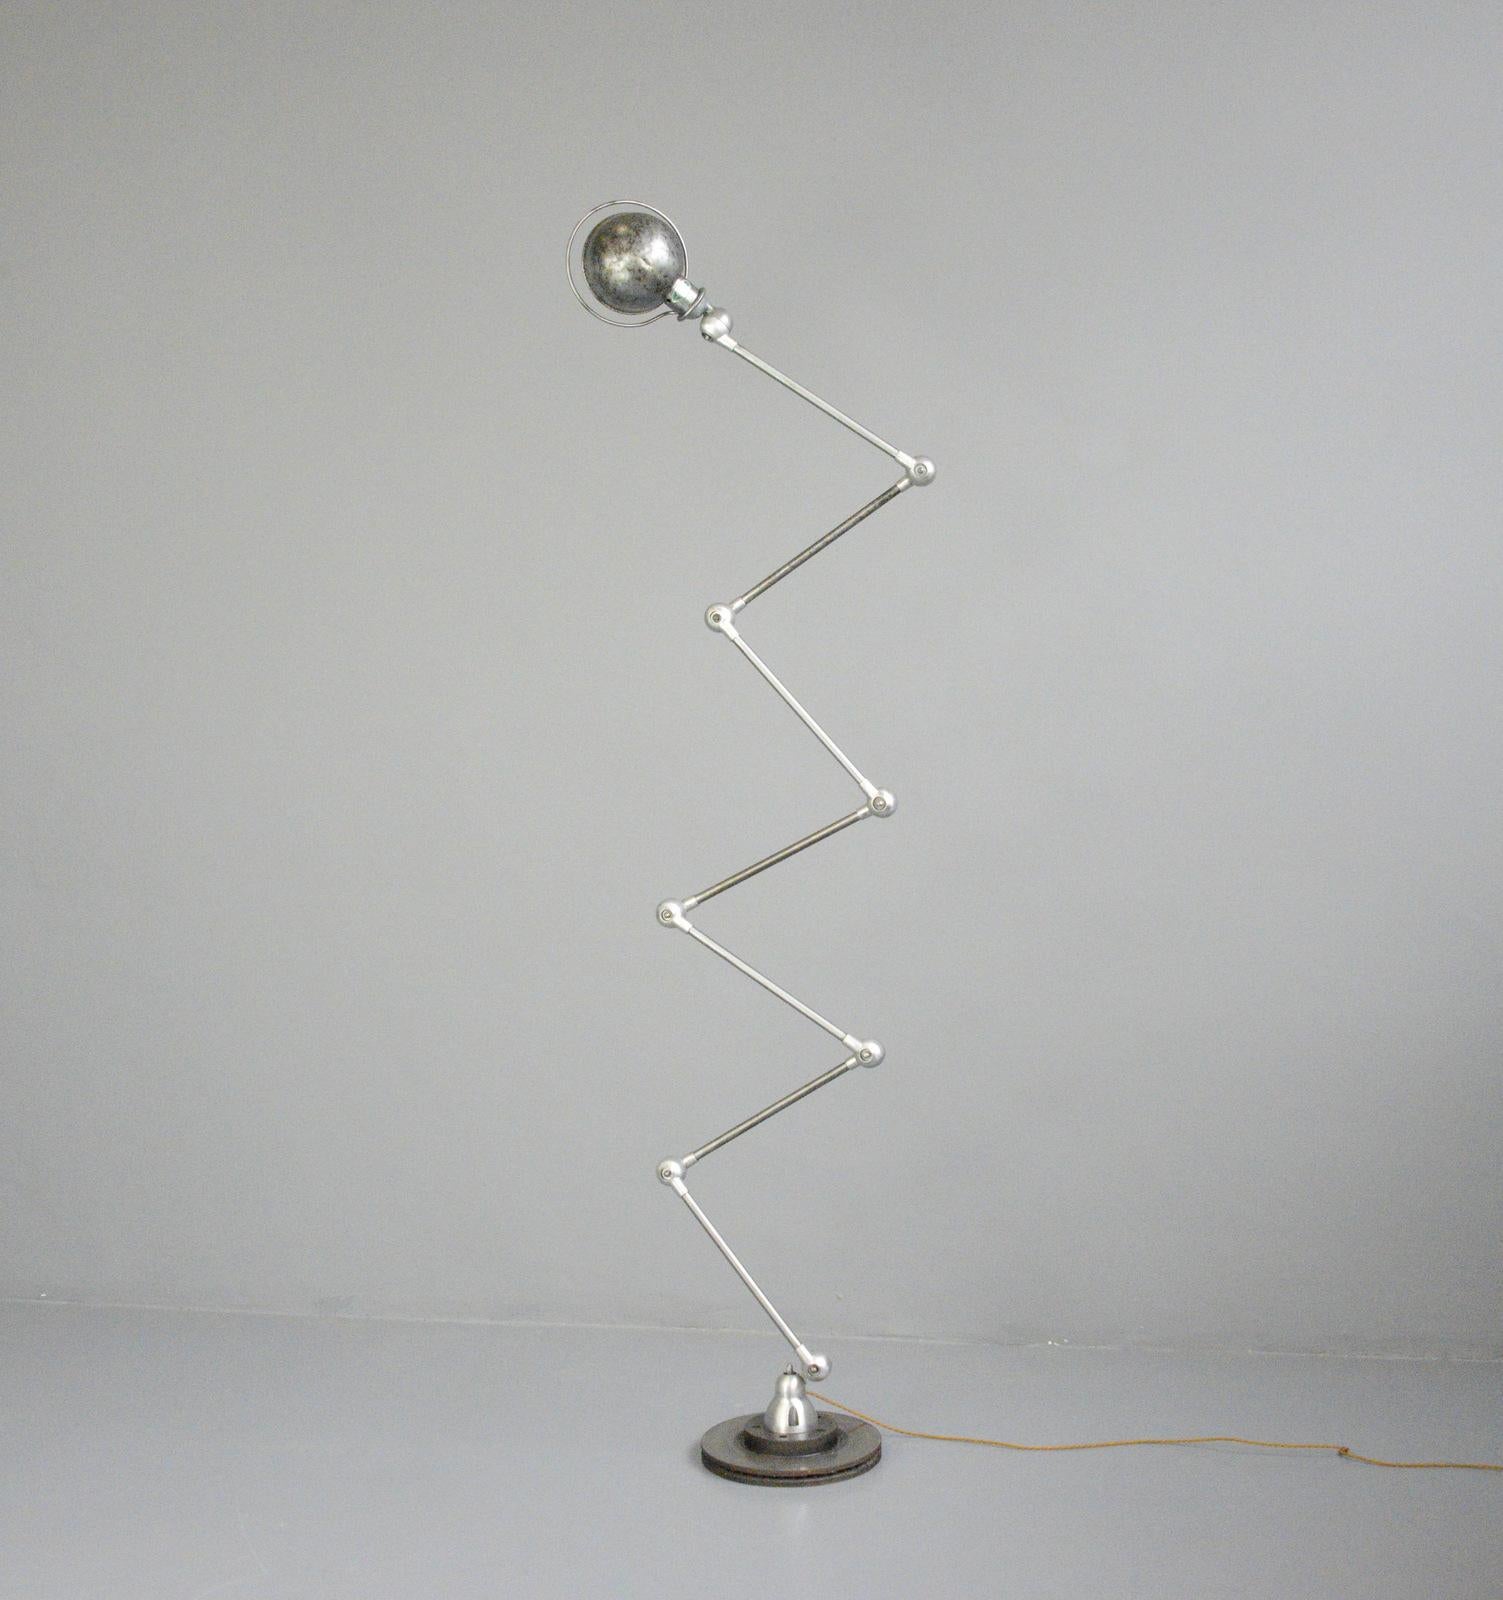 Large 7 arm floor standing jielde lamp Circa 1950s

- Brushed steel arms 
- Remote control On/Off
- Takes E27 fitting bulbs
- Design by Jean Louis Domecq for Jielde
- French ~ 1950s
- Stands at 200cm tall
- Shade measures 20cm